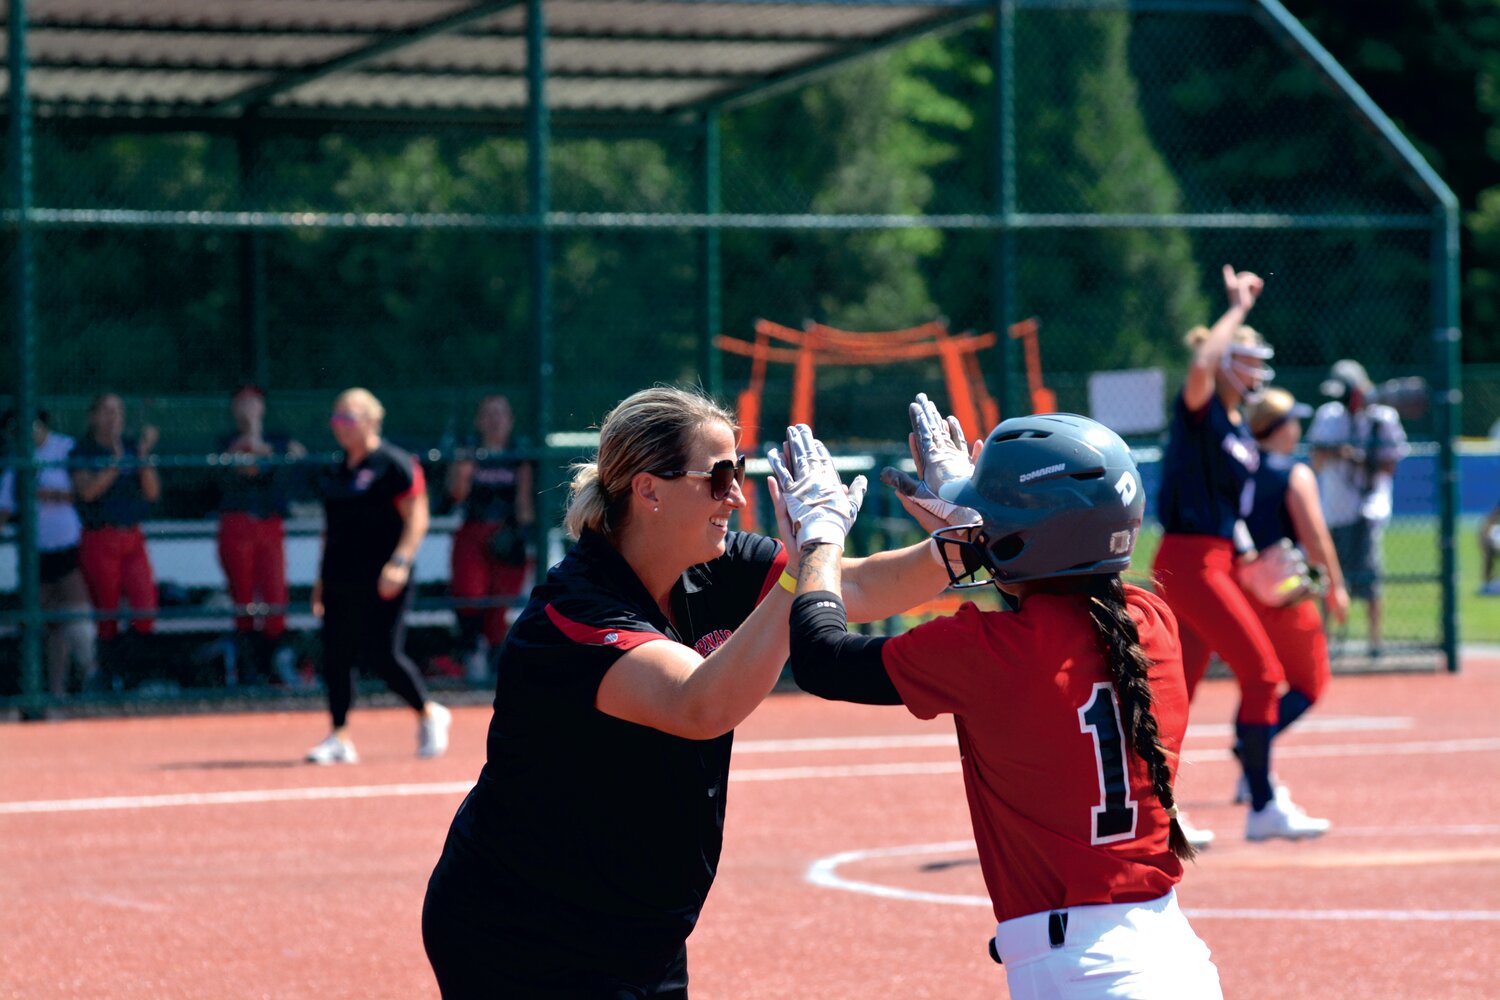 Coach Lindsay Walton high-fives Madisyn Erickson after she drove in runner Elissa Dewees for an RBI on May 25 in Lacey.